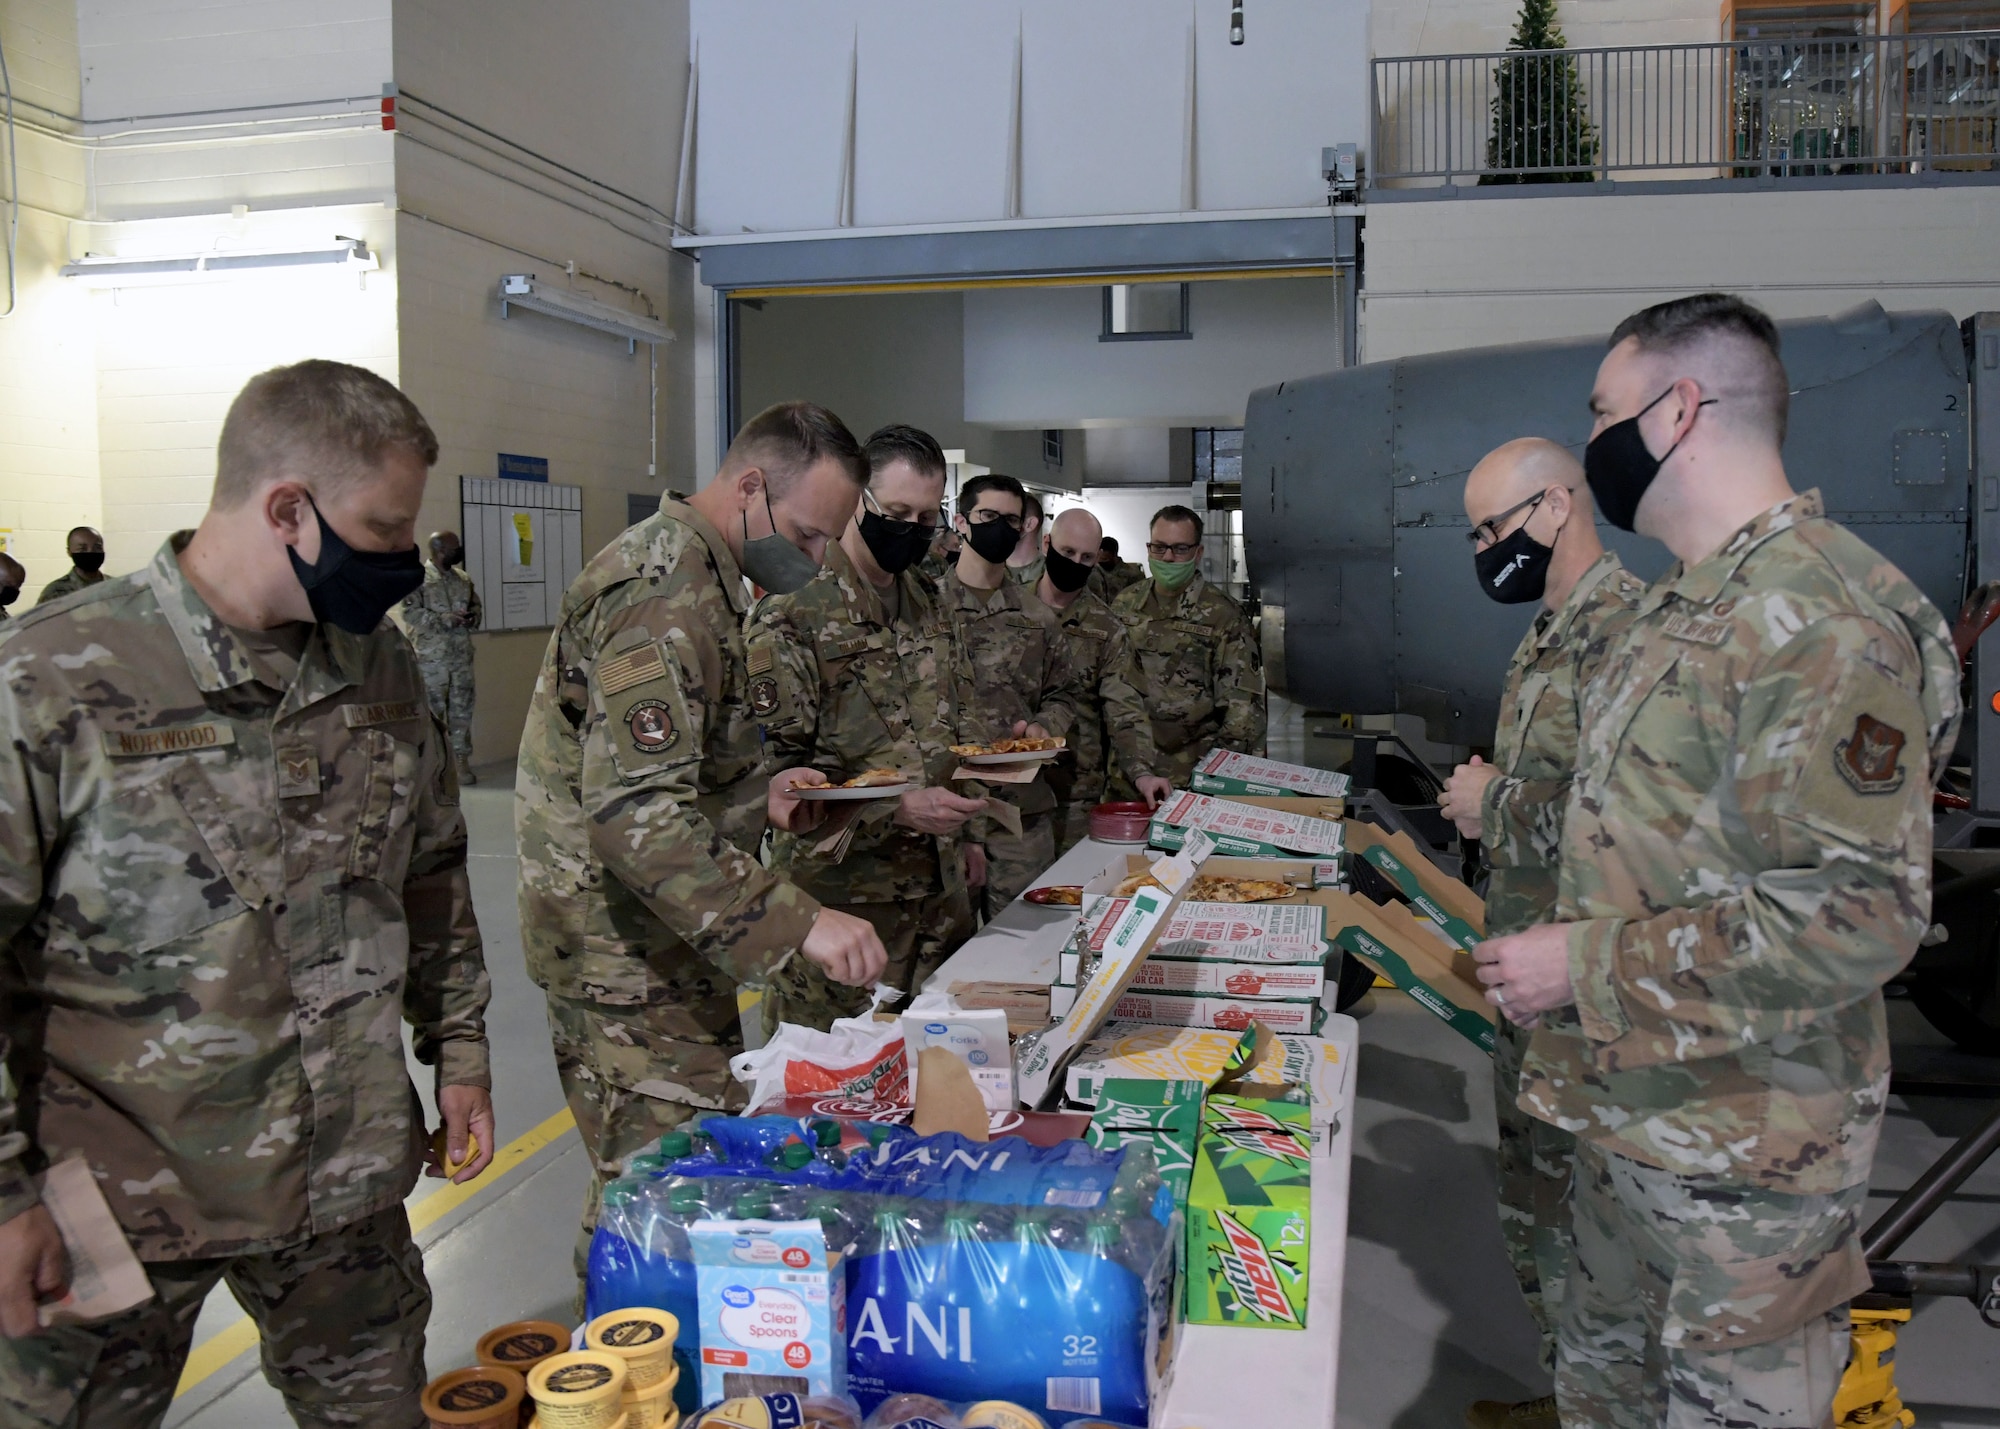 Lt. Col. Antonio Ortiz-Guzman, 94th Airlift Wing chaplain, and Senior Master Sgt. Anthony Devoile, 94th AW Religious Affairs superintendent, serve pizza to members of the 94th Maintenance Squadron during a luncheon on April 15, 2021, at Dobbins Air Reserve Base, Ga.